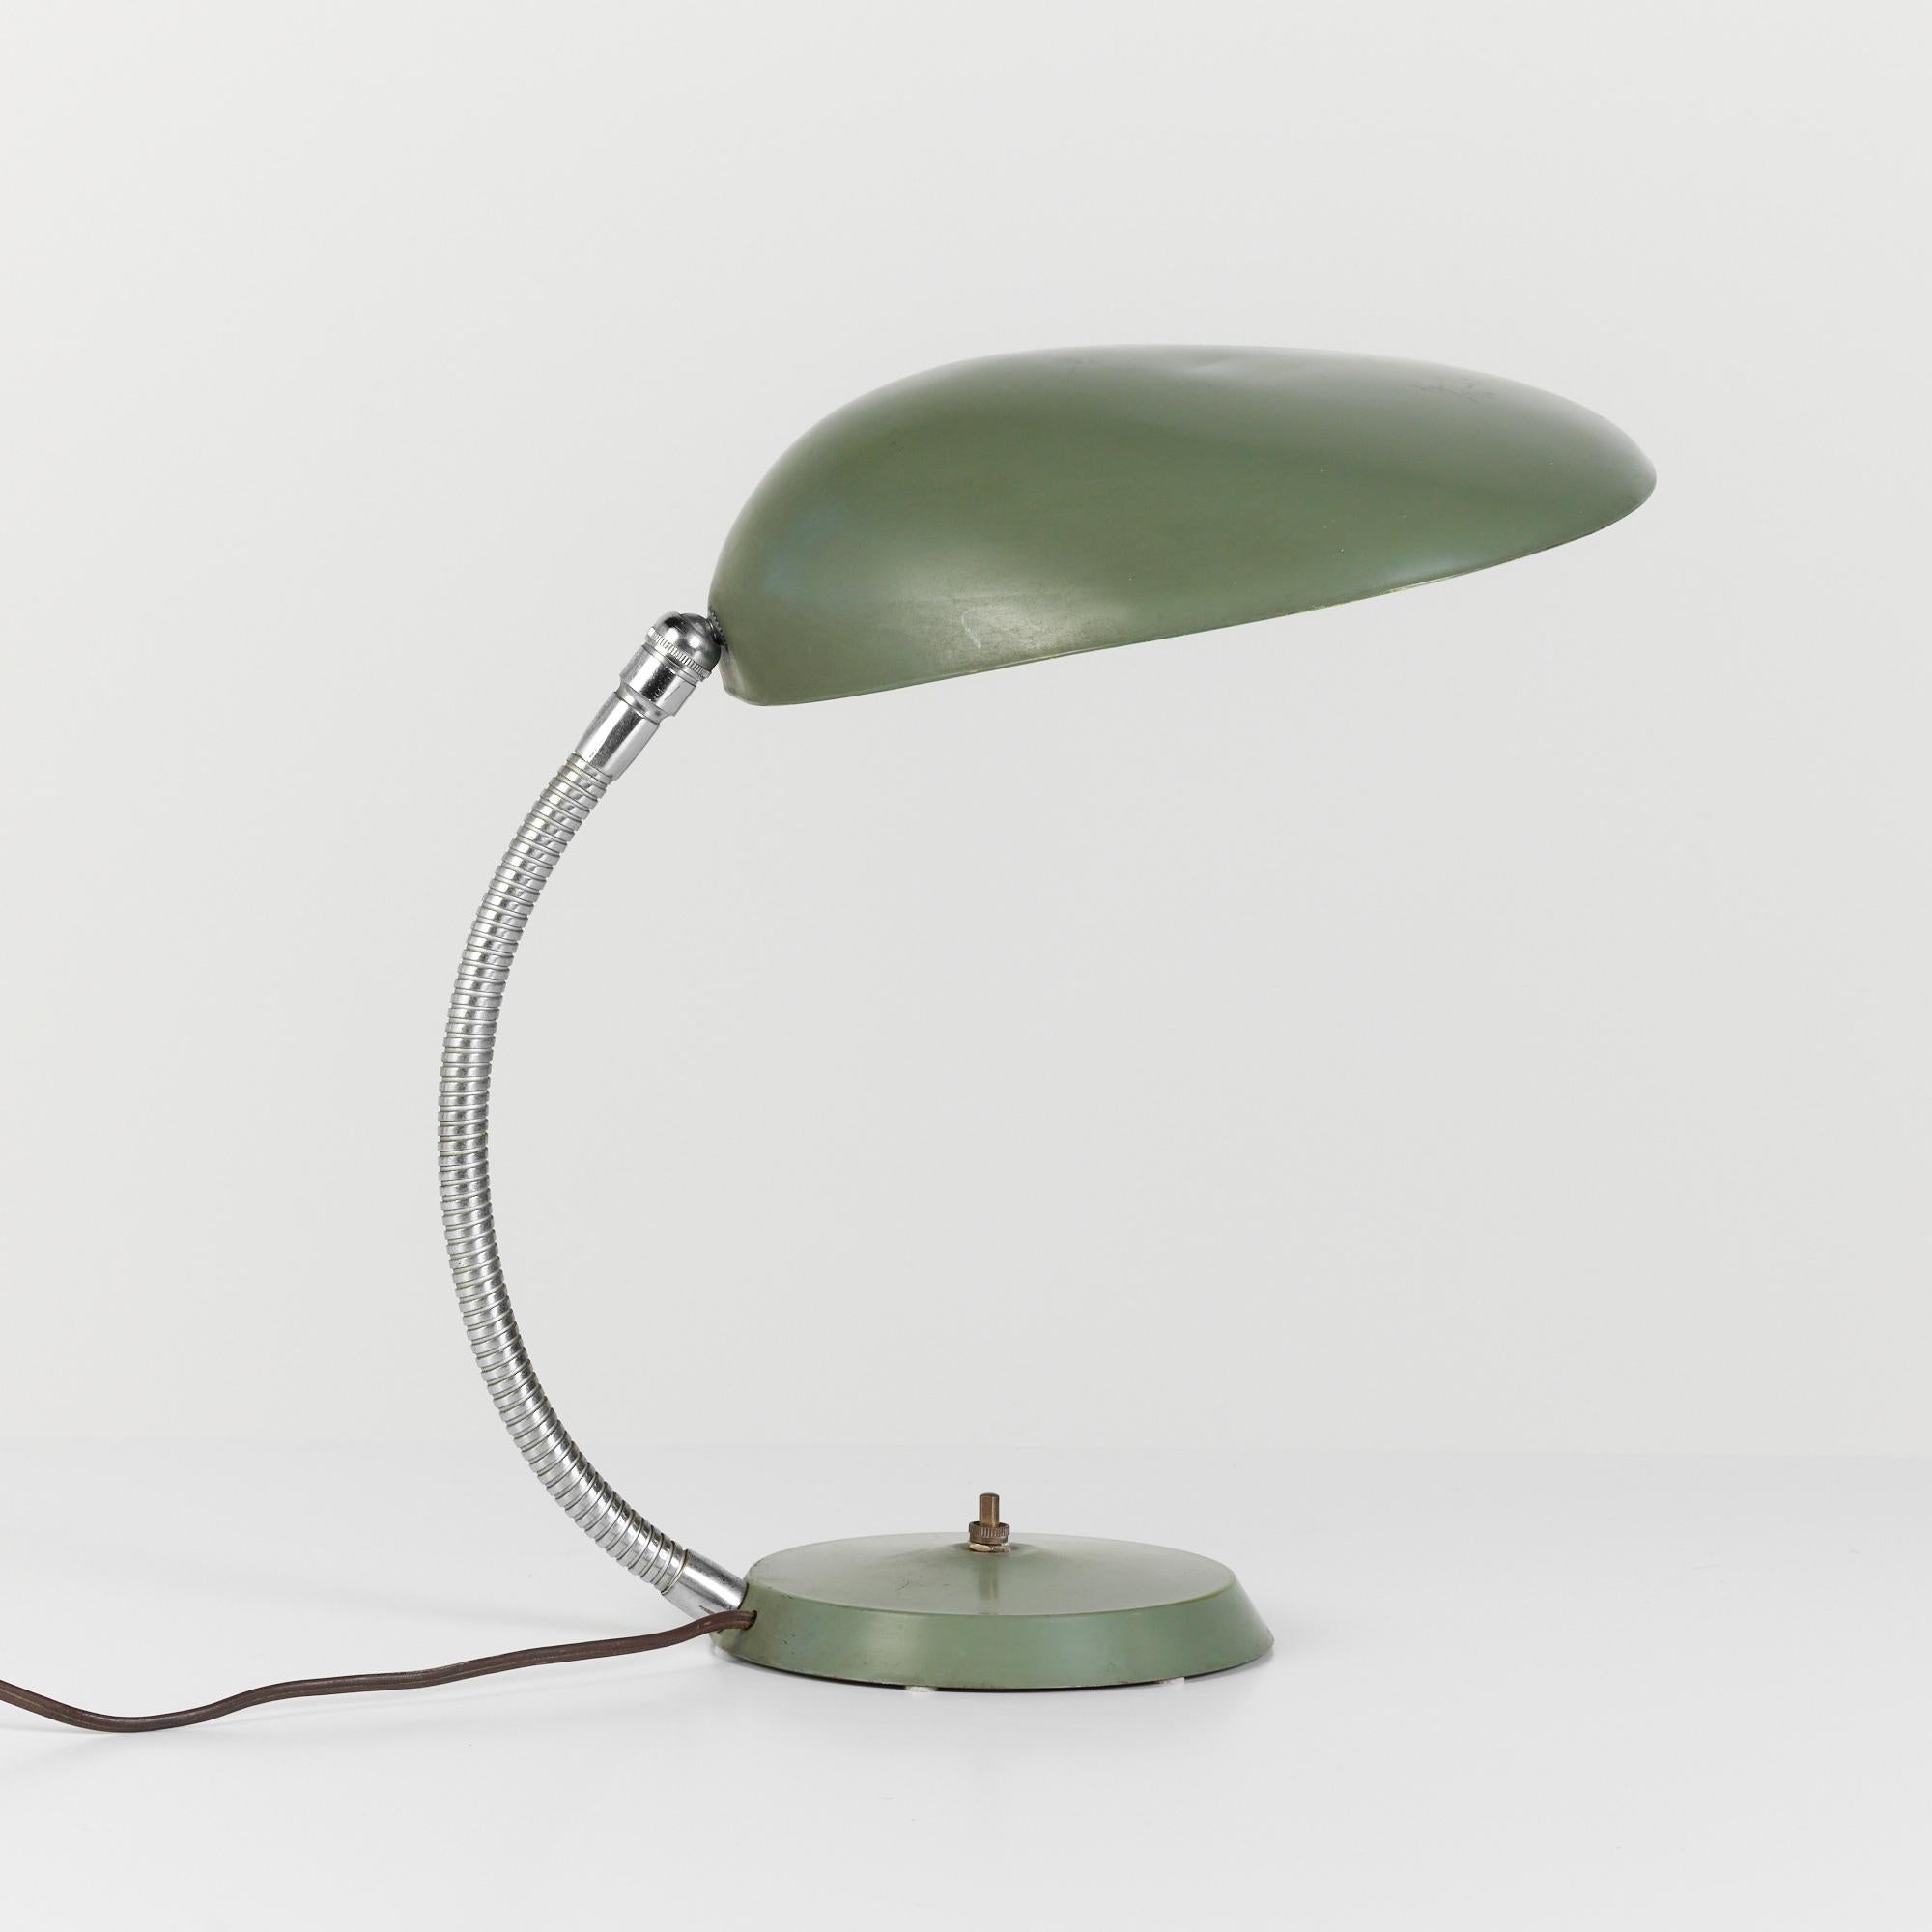 An award-winning 1948 design by Swedish-American Greta Grossman for Ralph O. Smith, a California-based lighting company. The lamp, colloquially known as the “Cobra” for its uniquely shaped shade that resembles a cobra’s hood, is counterweighted with